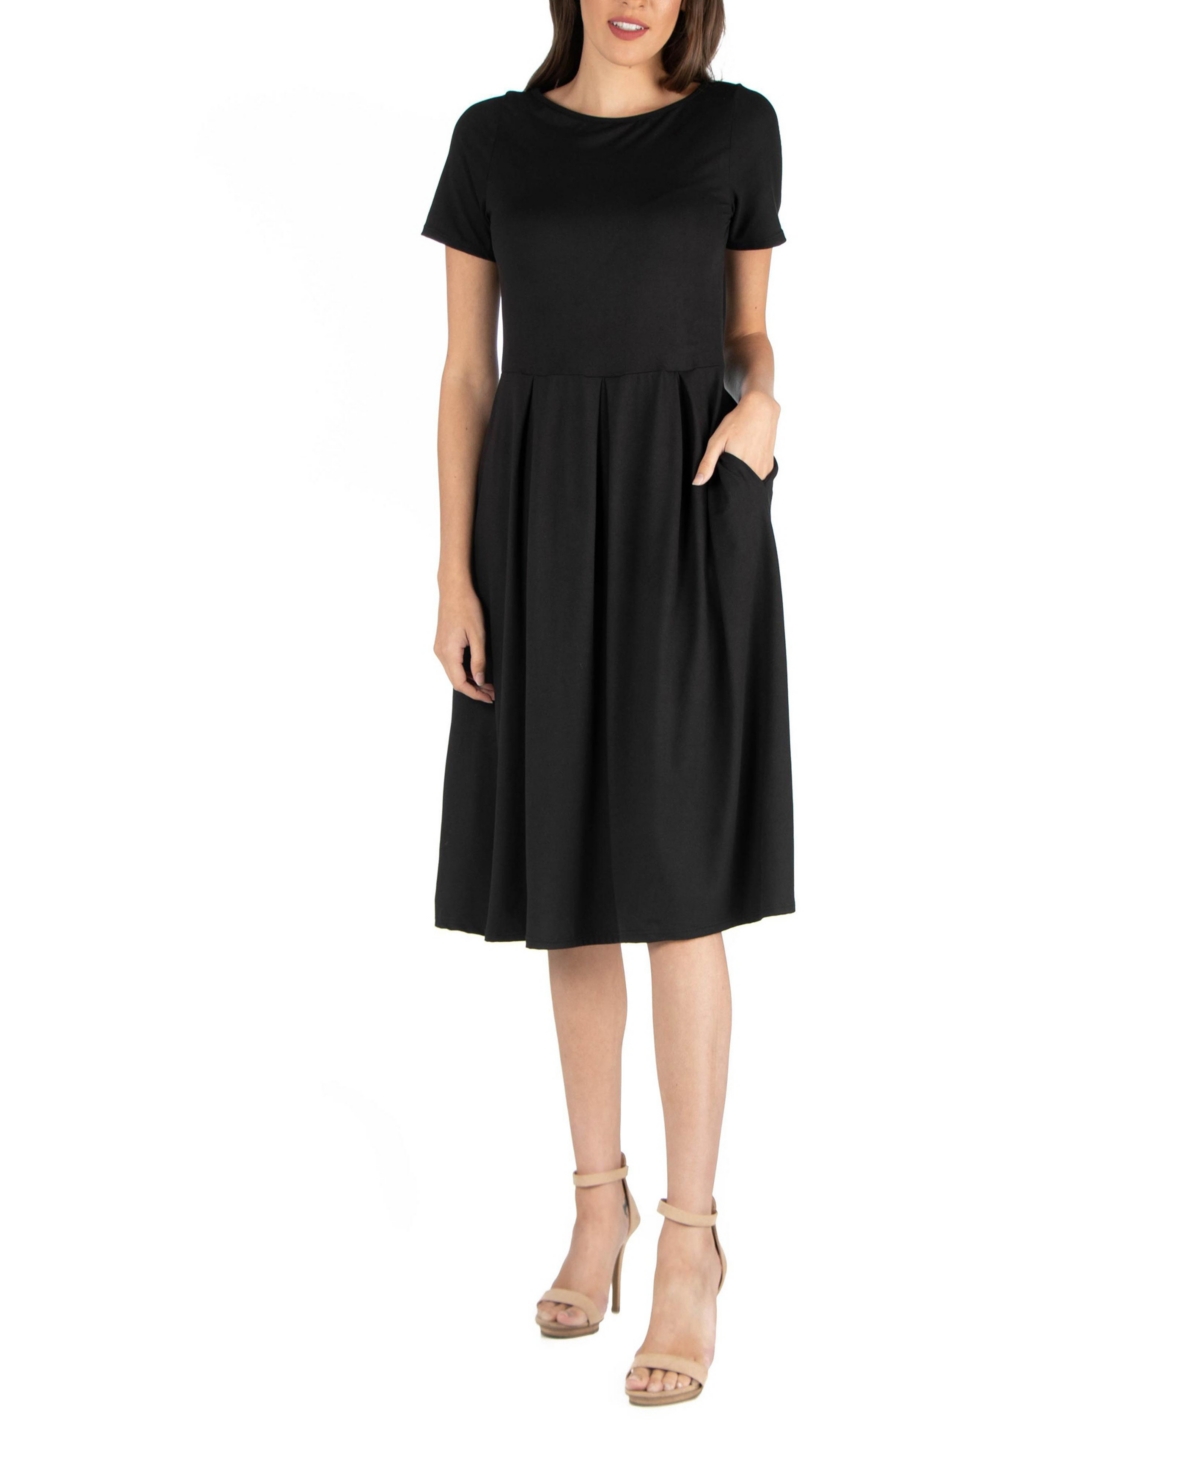 Women's Midi Dress with Short Sleeves and Pocket Detail - Black